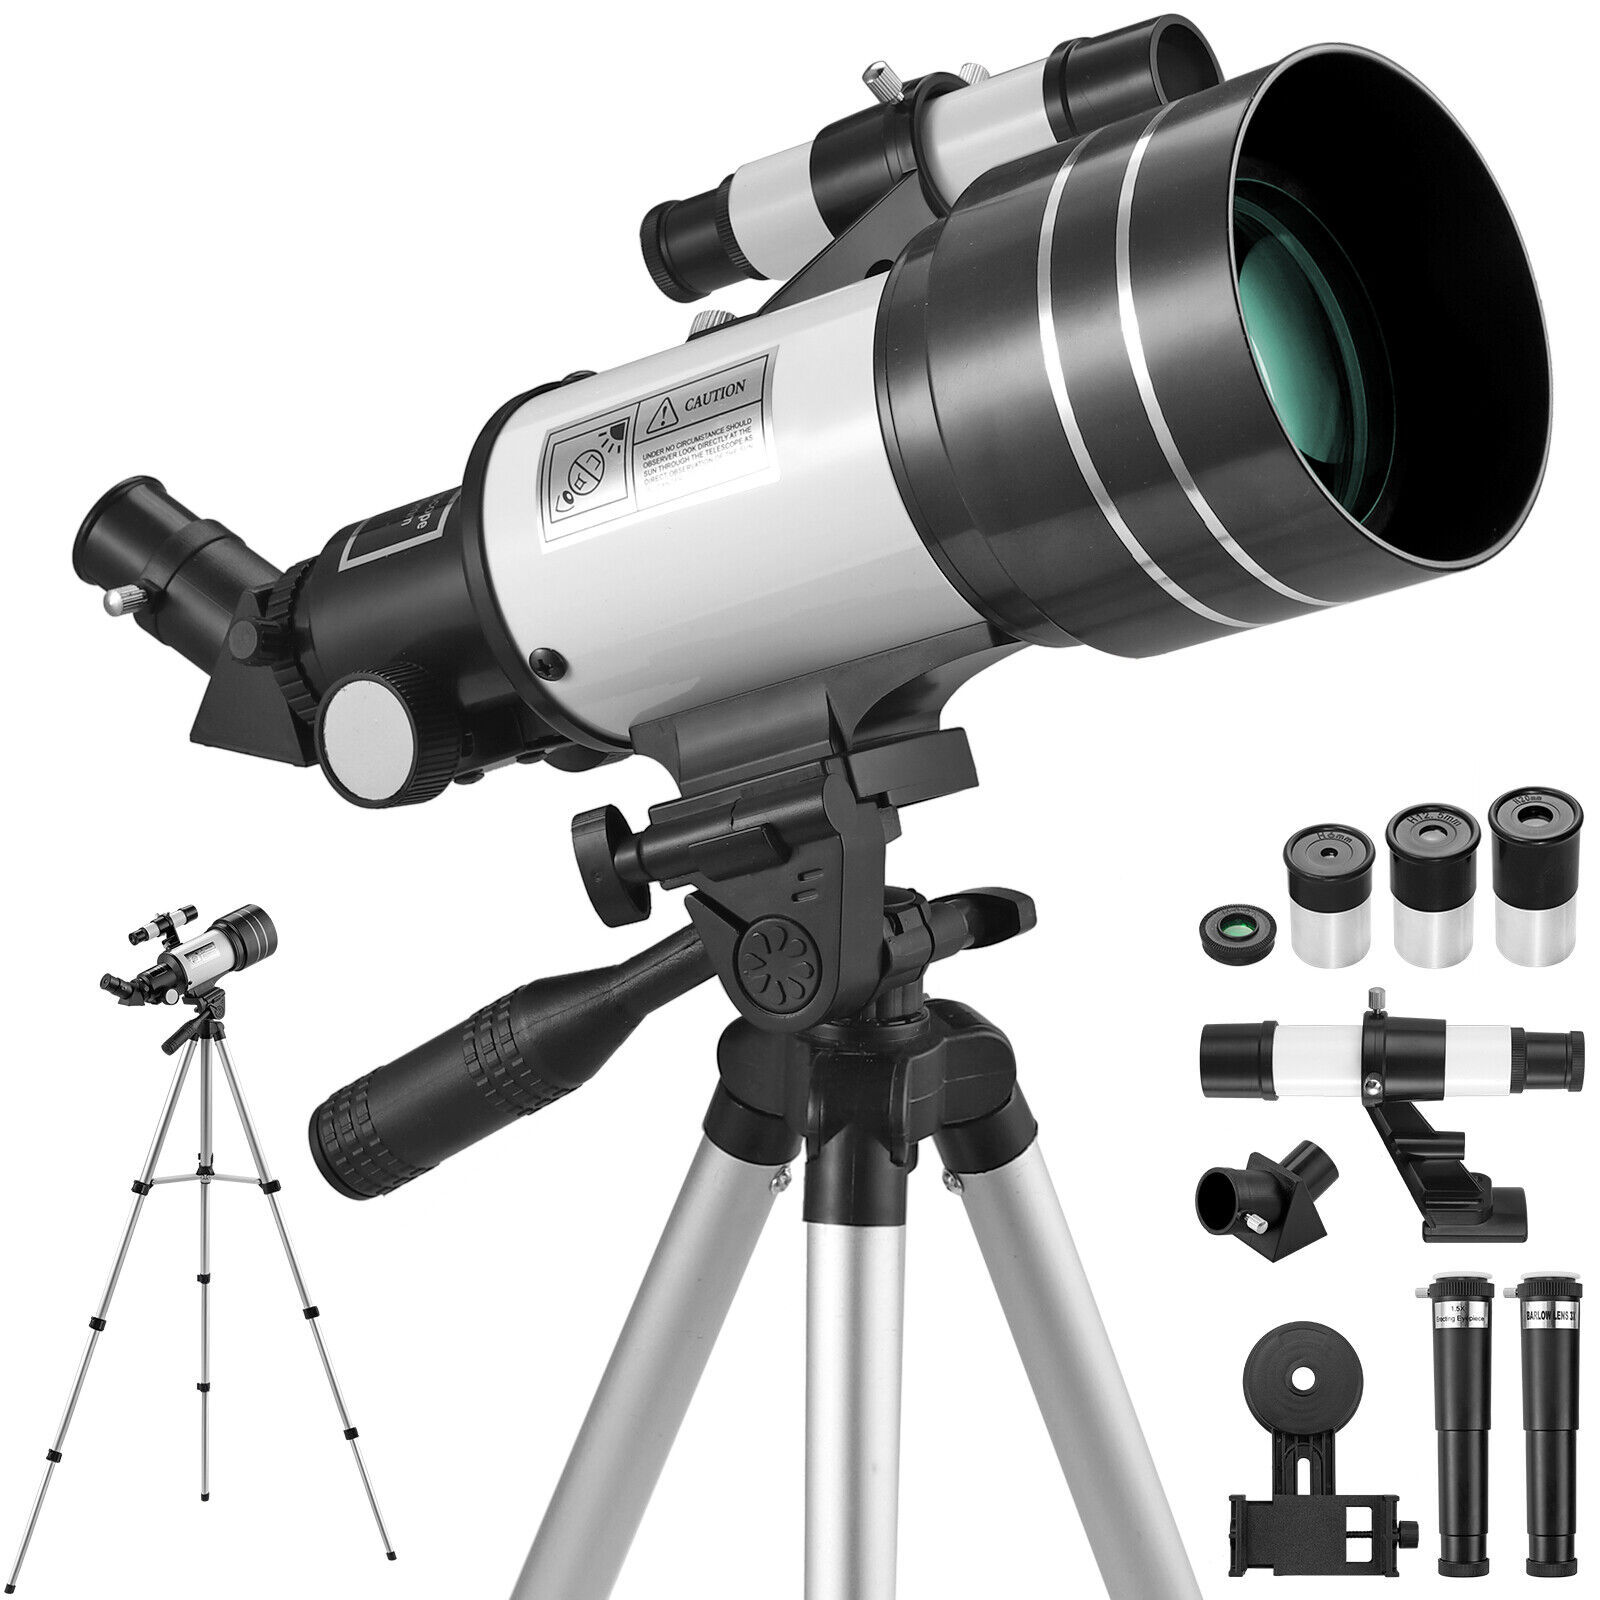 300mm Astronomical Telescope 150X with Phone Adapter for Beginner Moon Watching